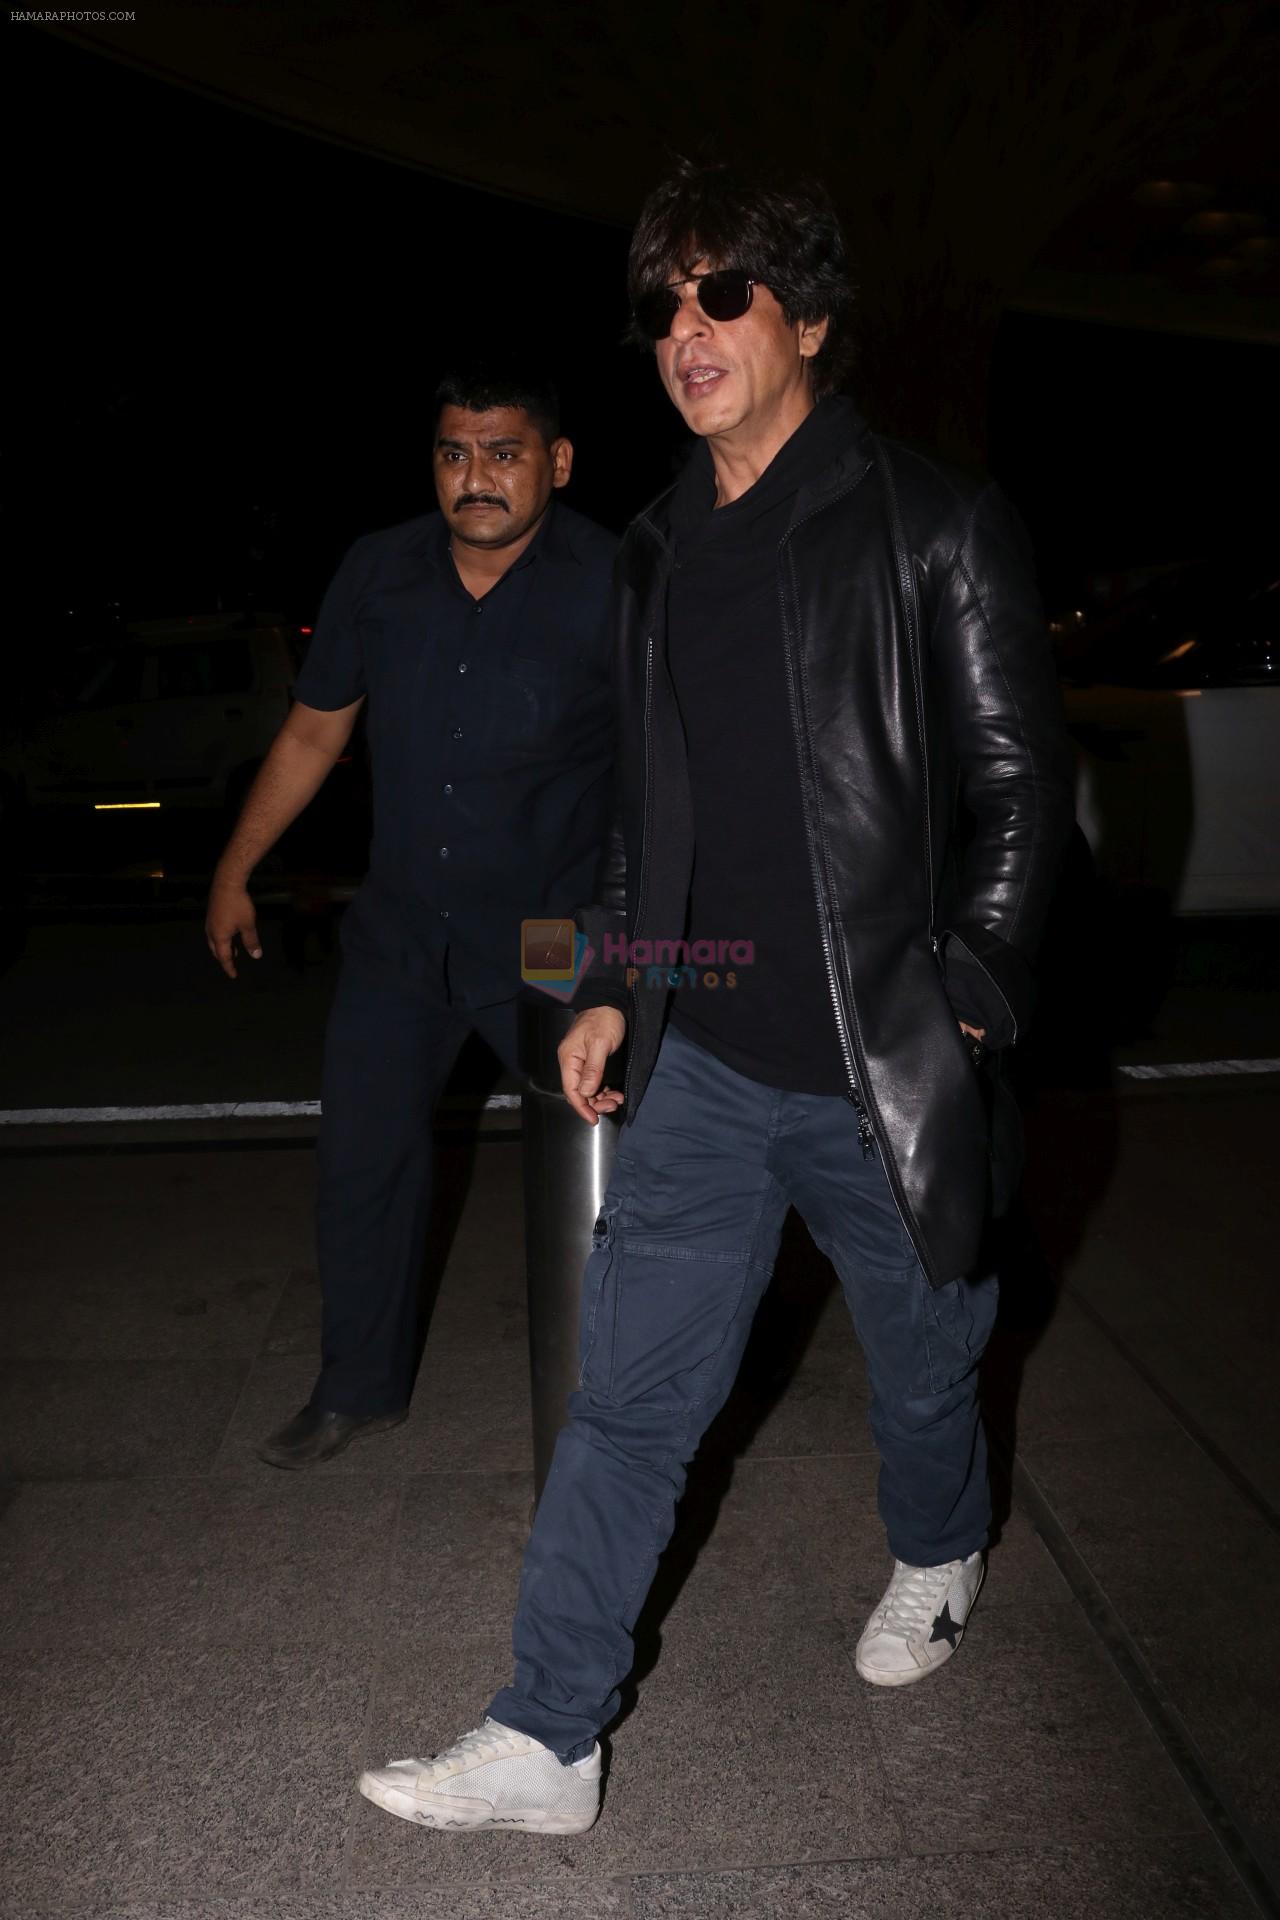 Shah Rukh Khan spotted at airport on 29th July 2017